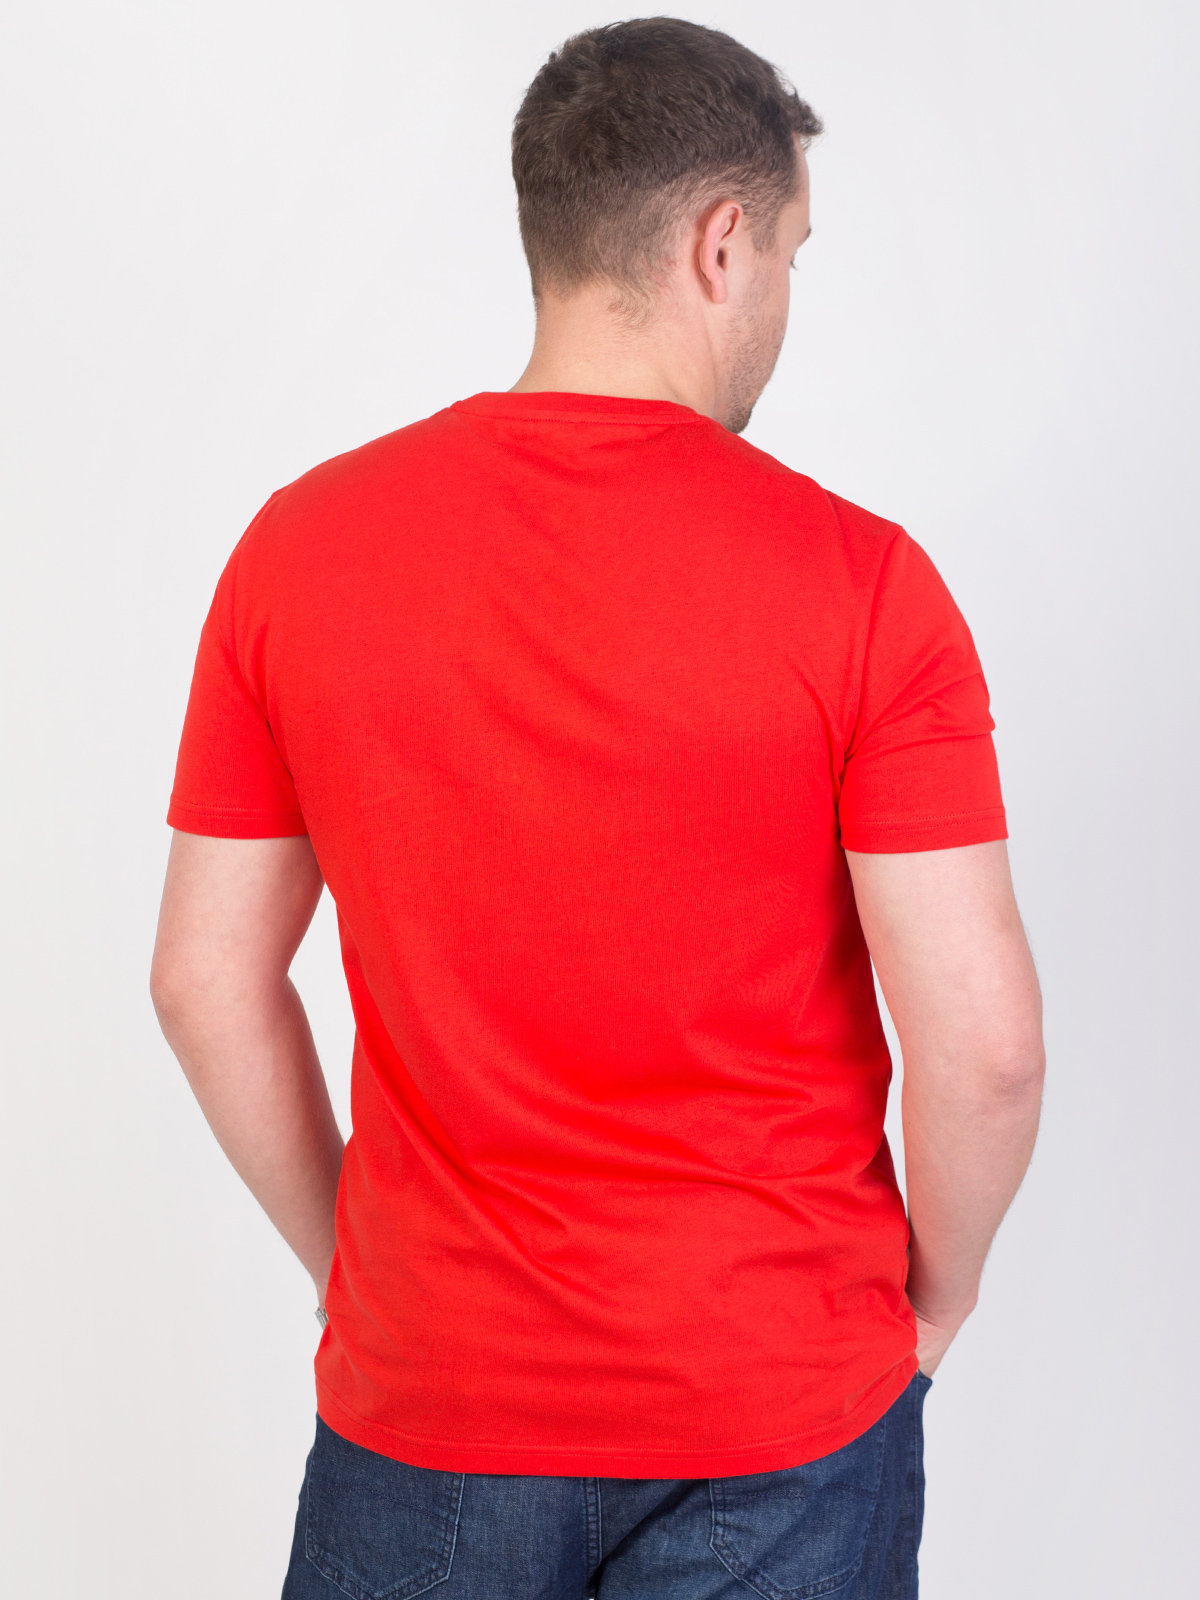 Red tshirt with adventure print - 96418 € 16.31 img4